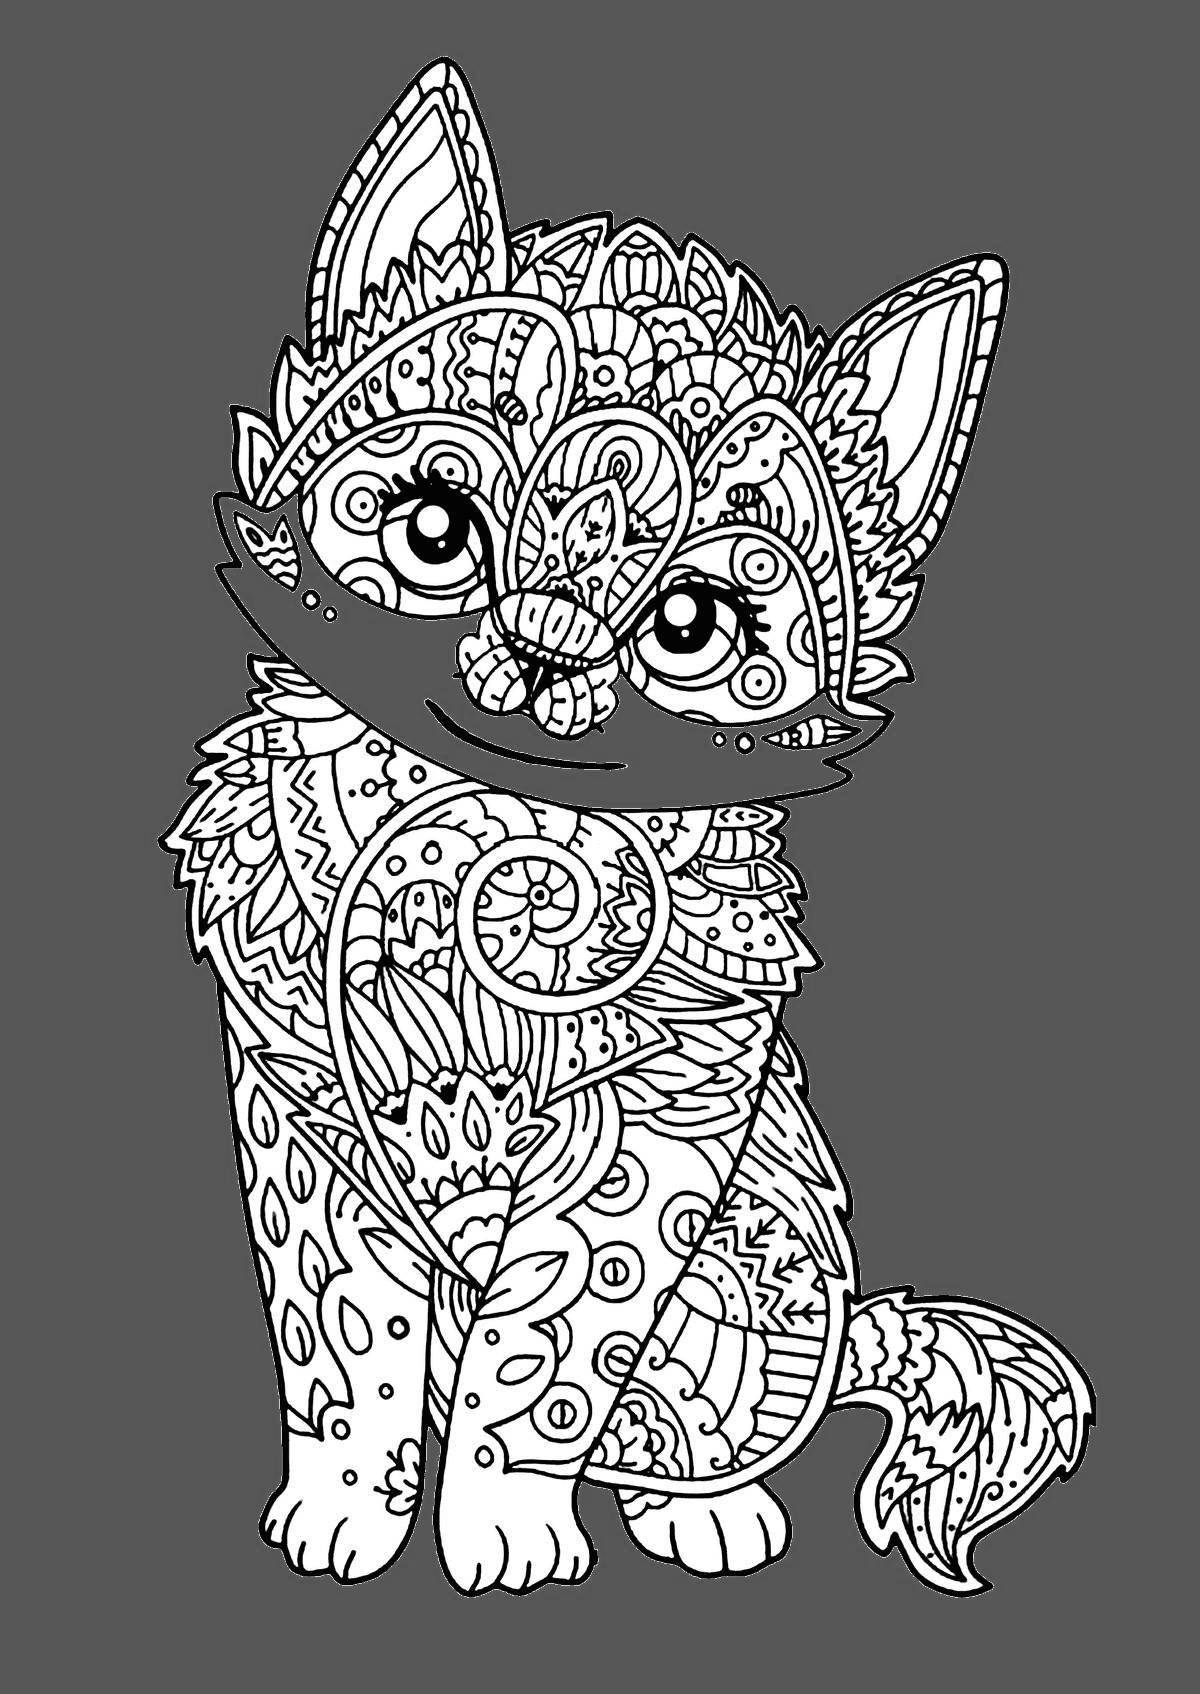 Funny coloring book for girls with 9 year old animals